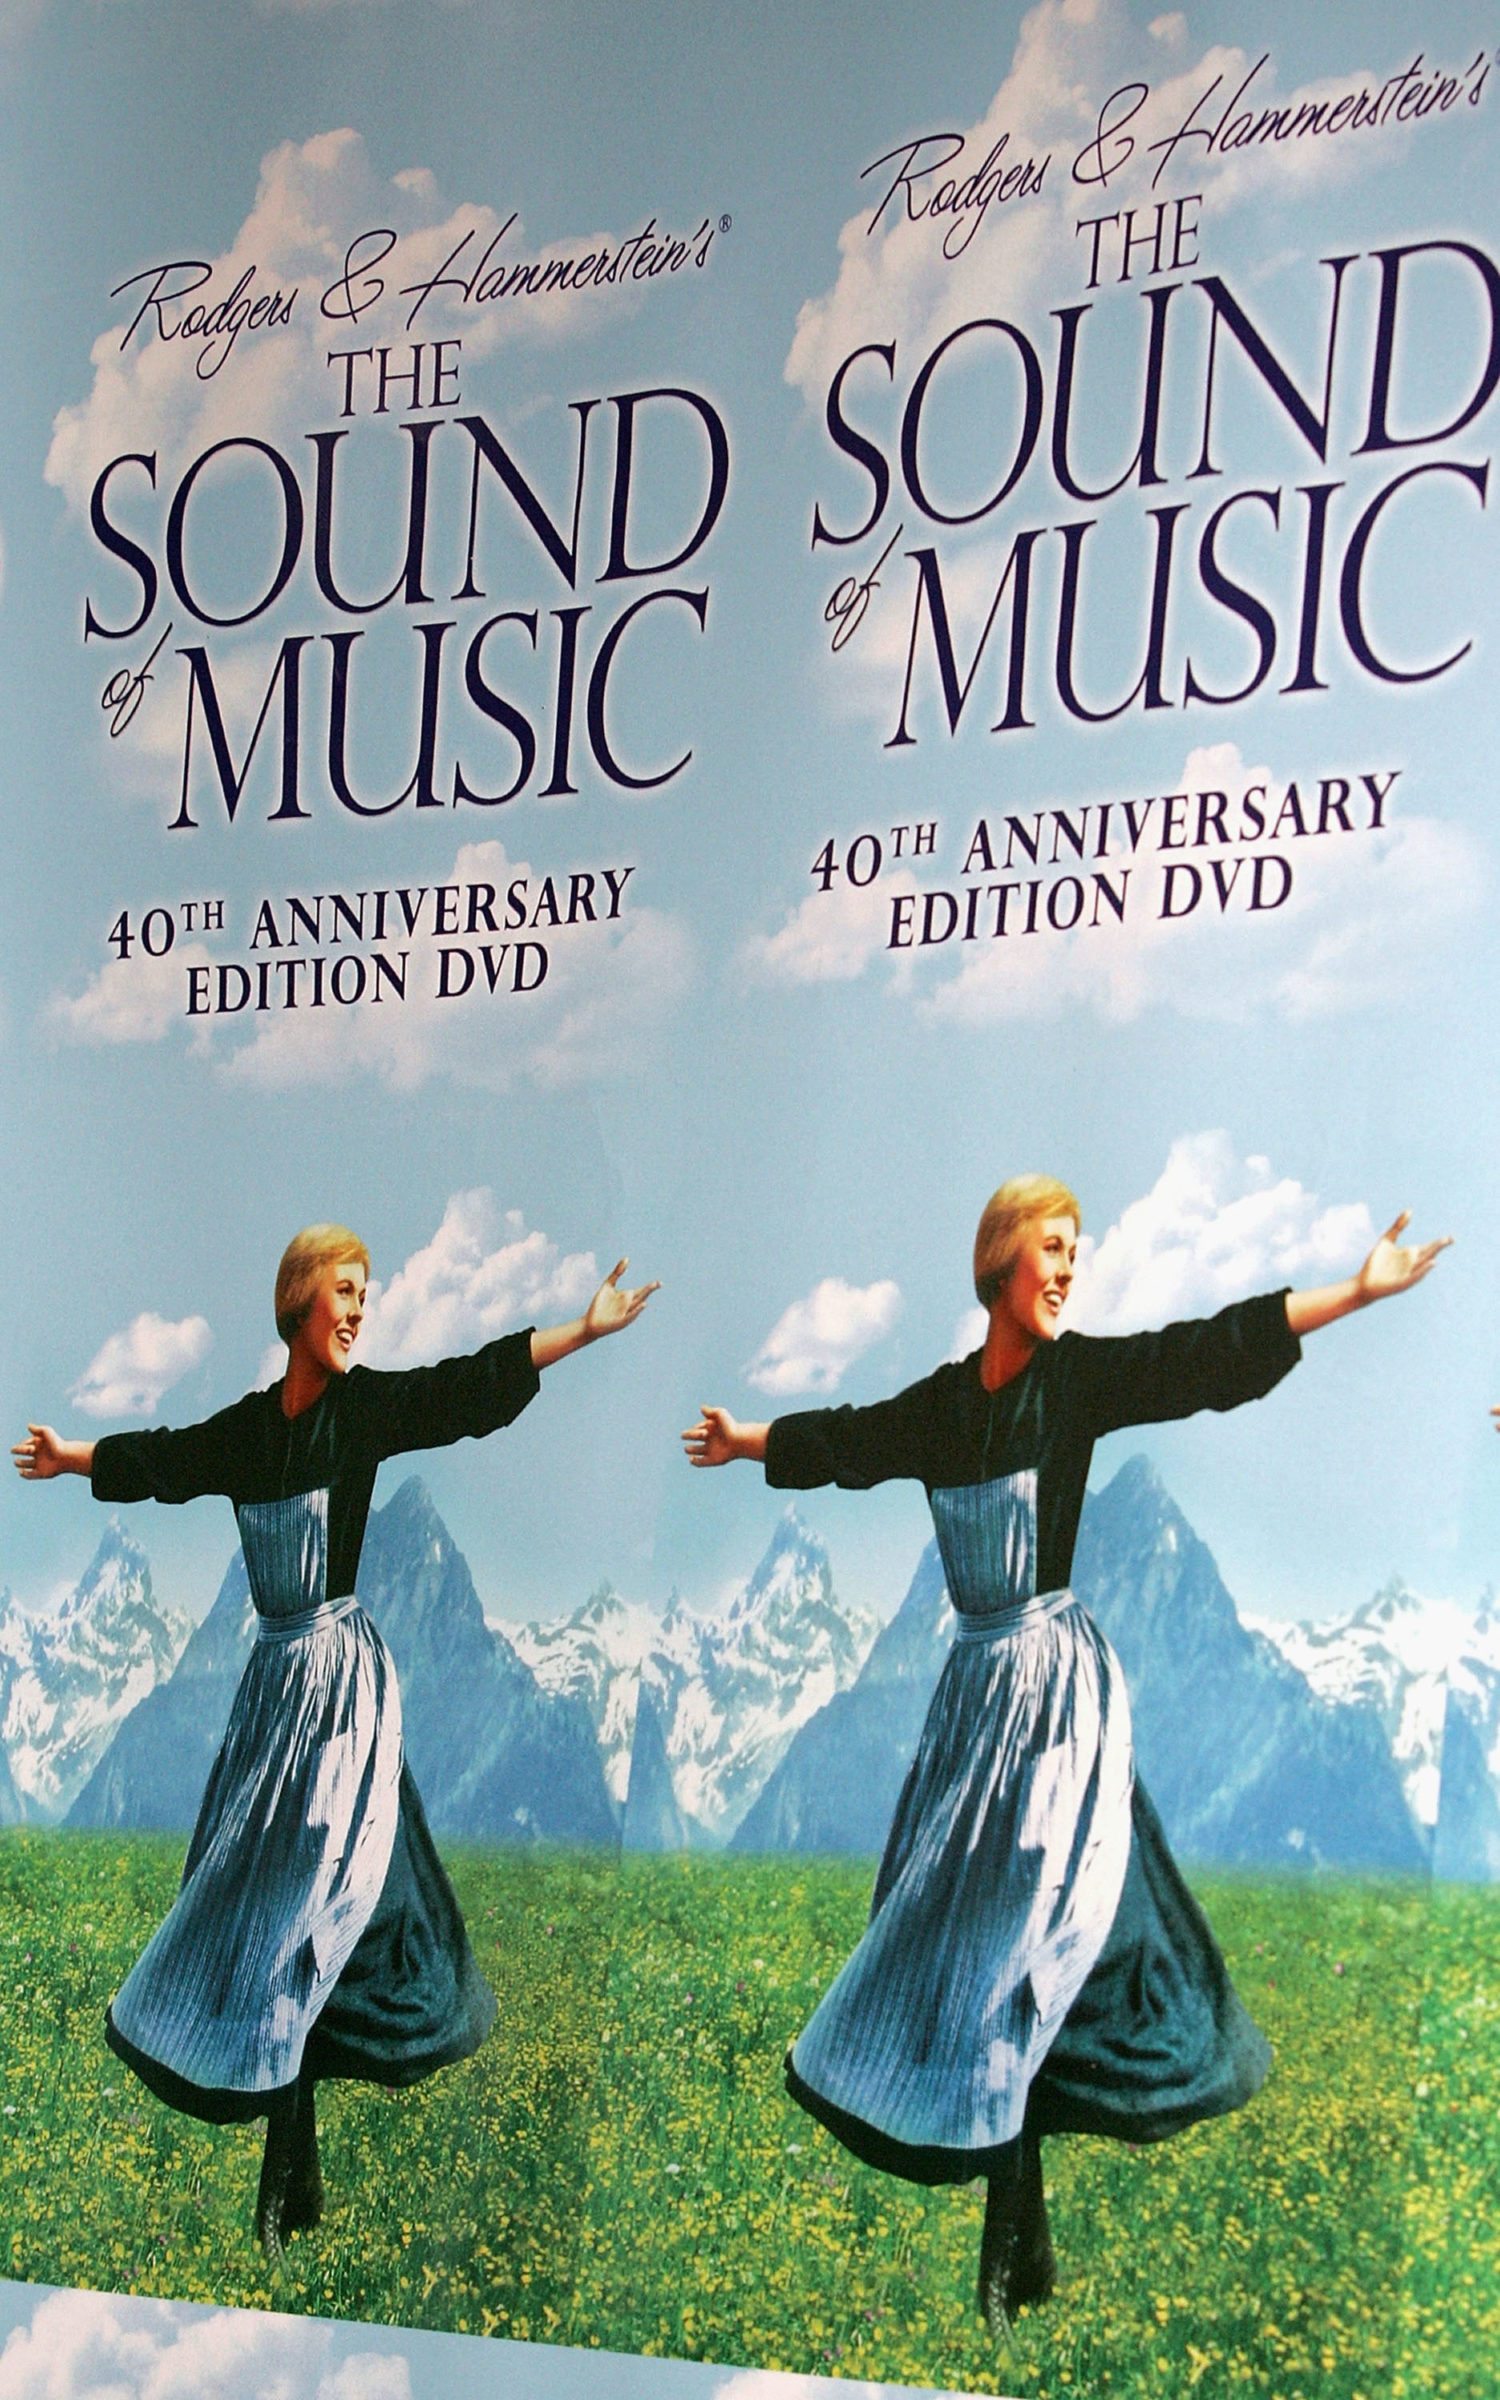 The 40th Anniversary & DVD Release 'The Sound of Music'